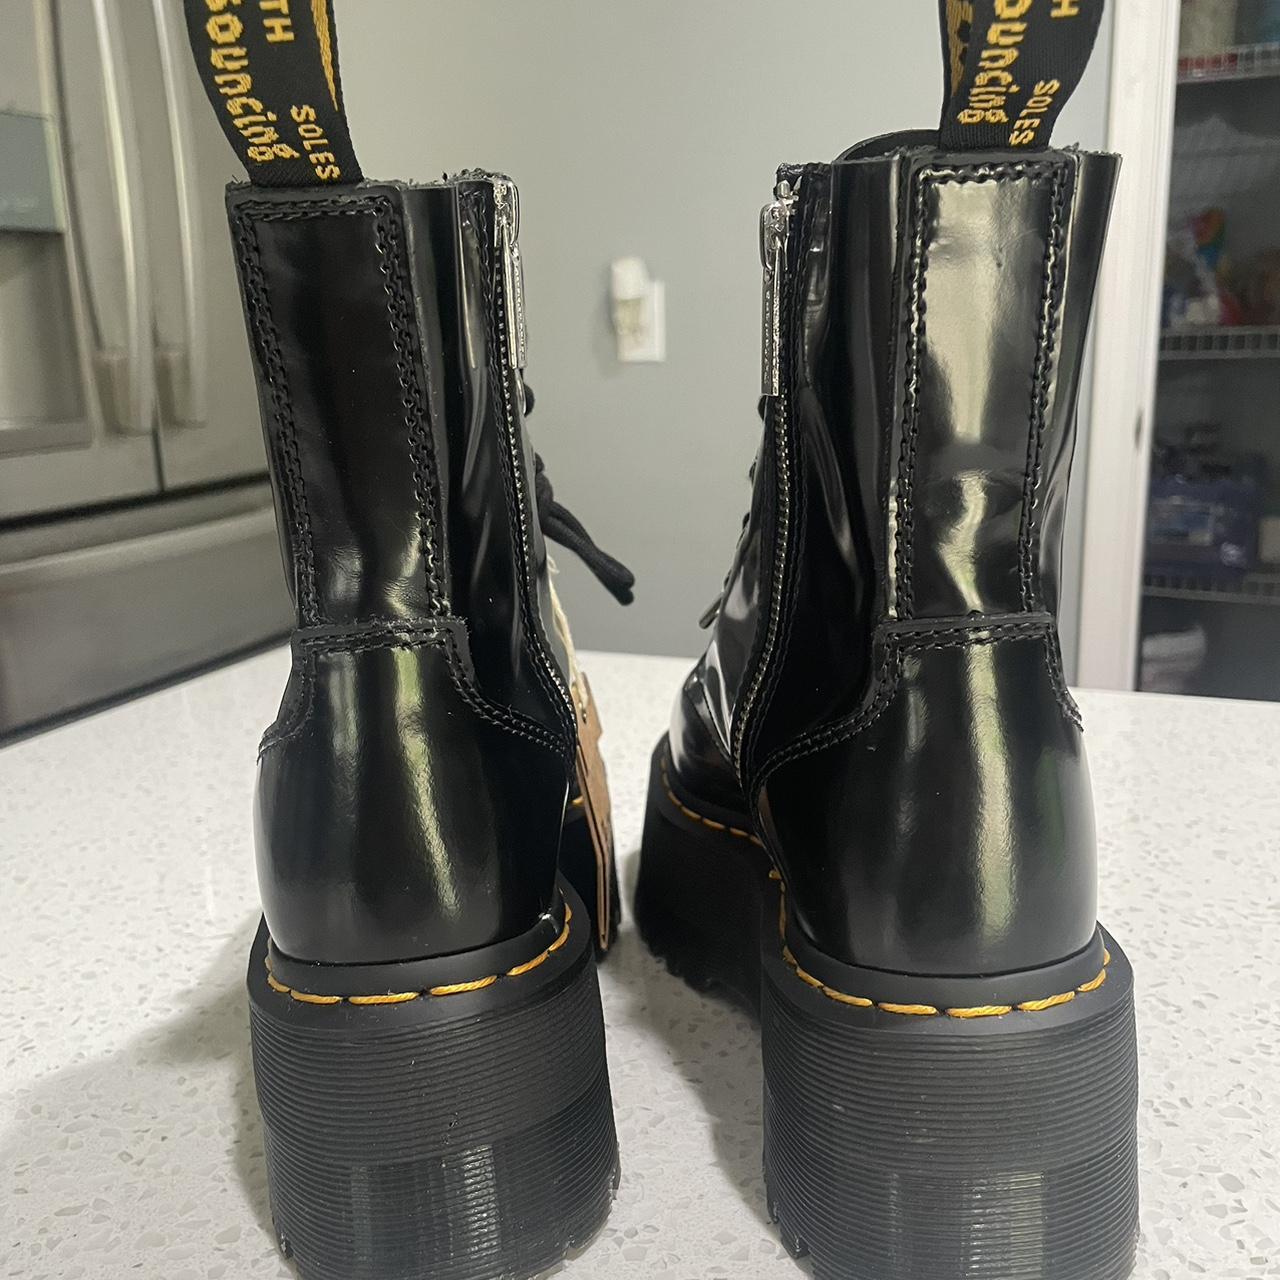 Dr. Martens Women's Black and Yellow Boots (4)